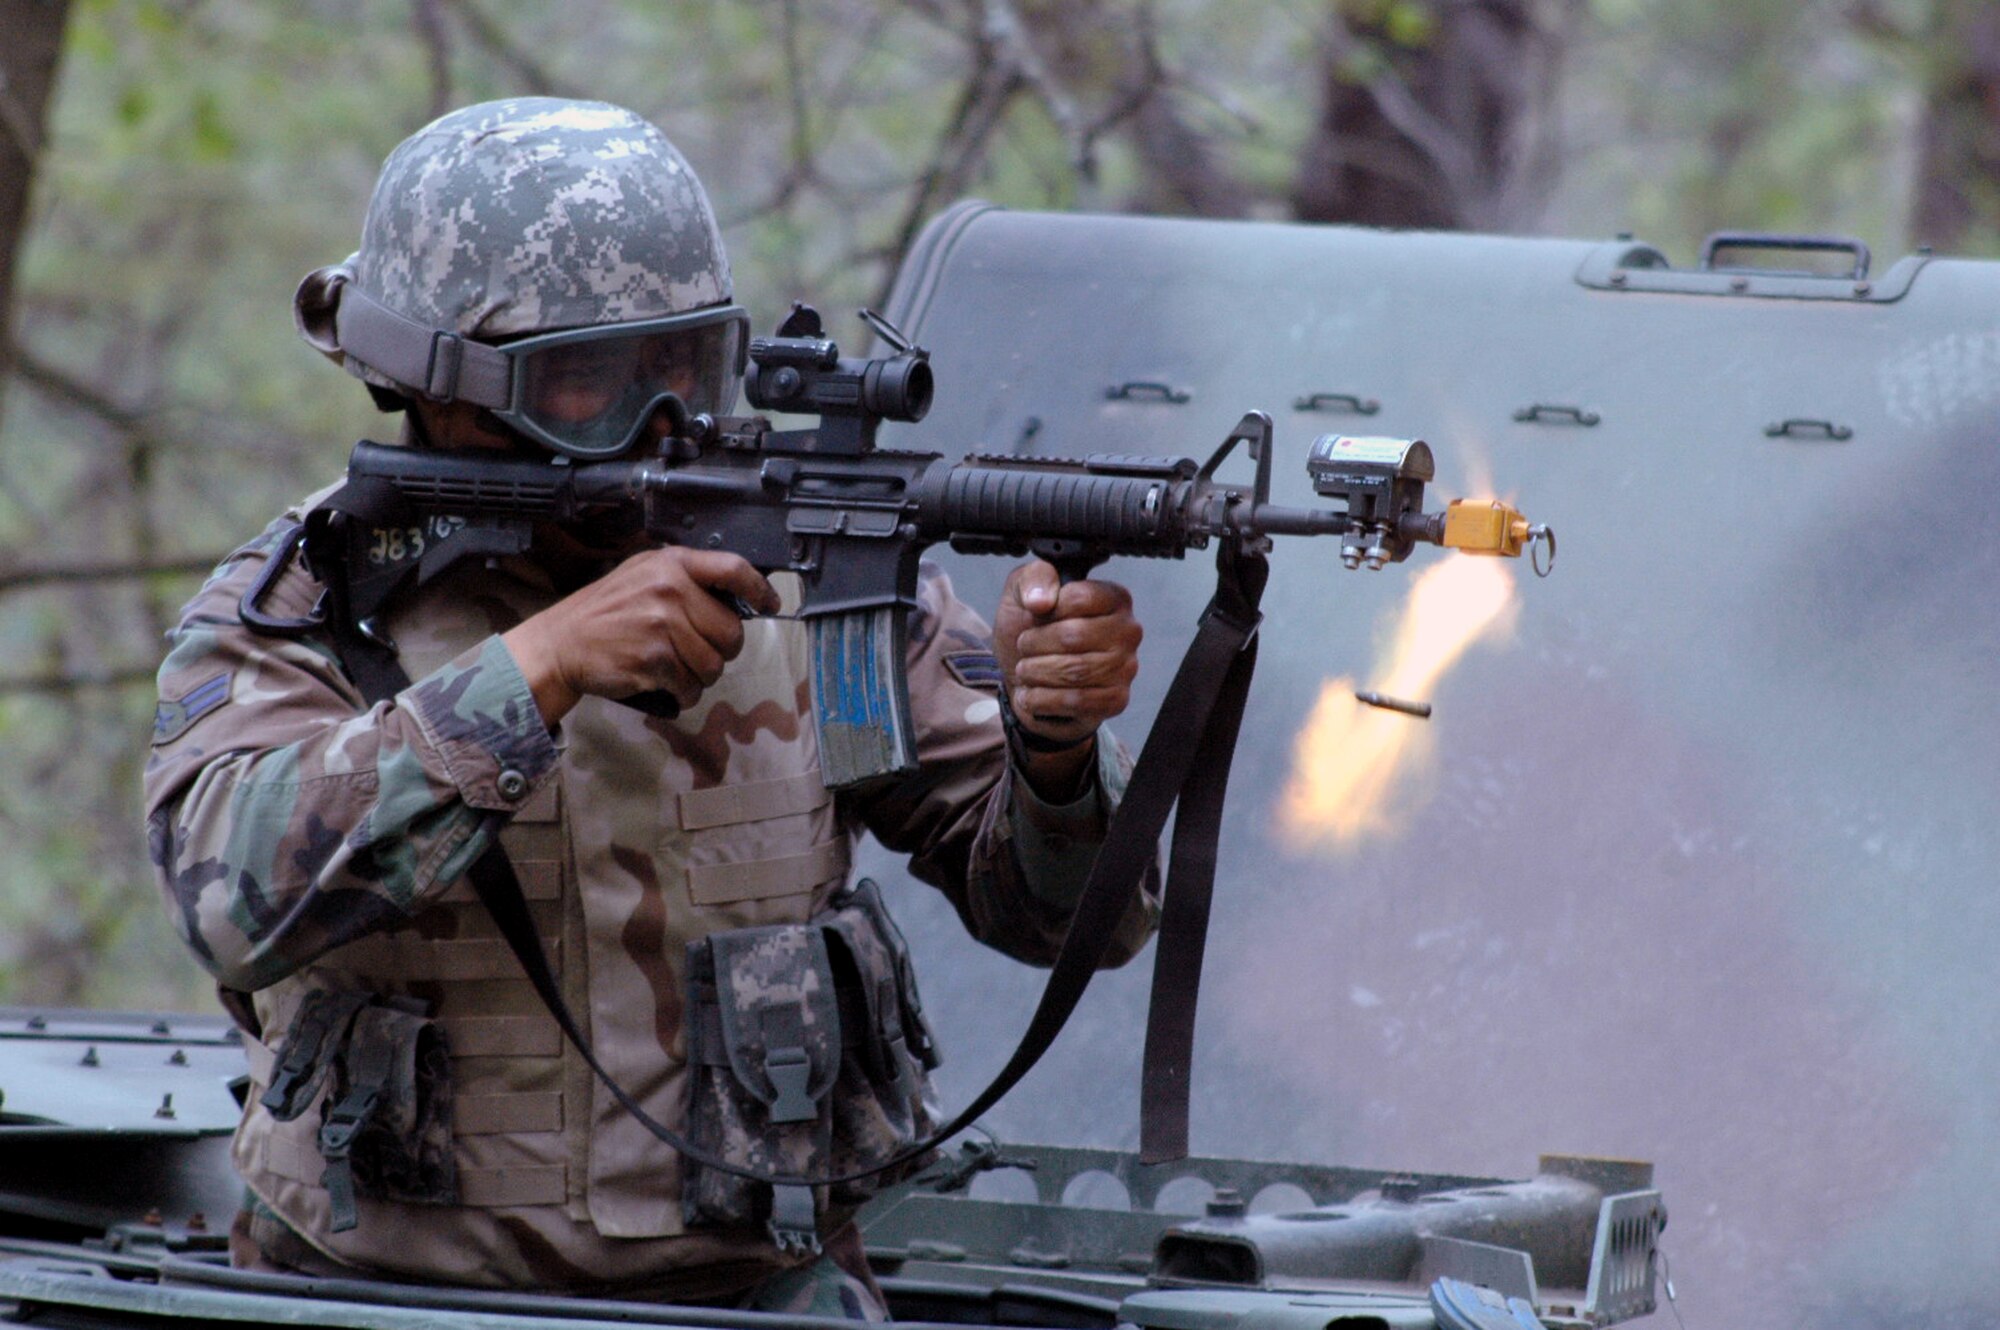 A student in the Air Force Phoenix Warrior Training Course responds to enemy fire during training in convoy operations for the course June 20, 2008, on a Fort Dix, N.J., range.  The course, taught by the U.S. Air Force Expeditionary Center's Expeditionary Operations School and 421st Combat Training Squadron, prepares security forces Airmen for upcoming deployments.  (U.S. Air Force Photo/Tech. Sgt. Scott T. Sturkol)